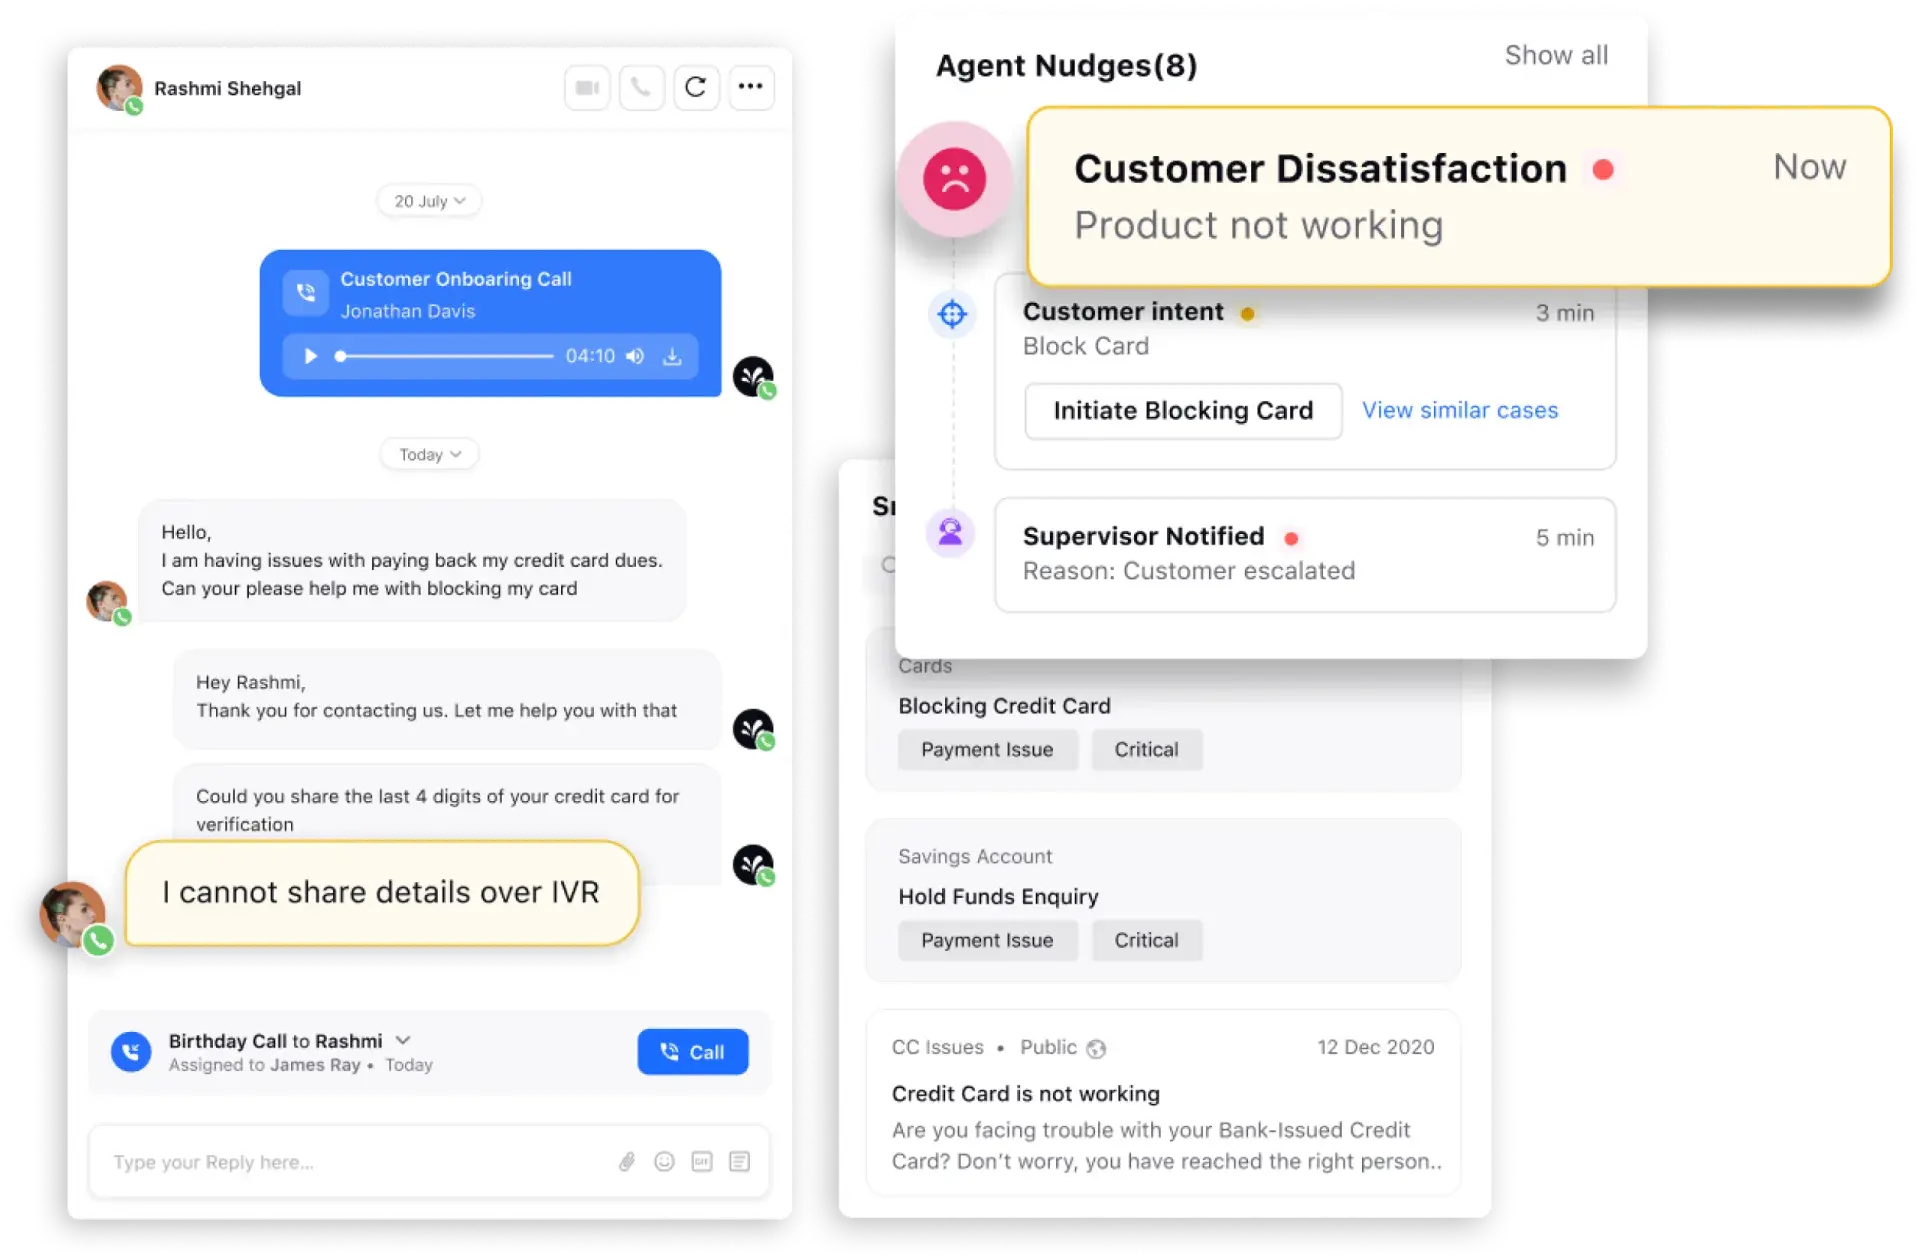 Notify supervisors with alerts on live conversations 